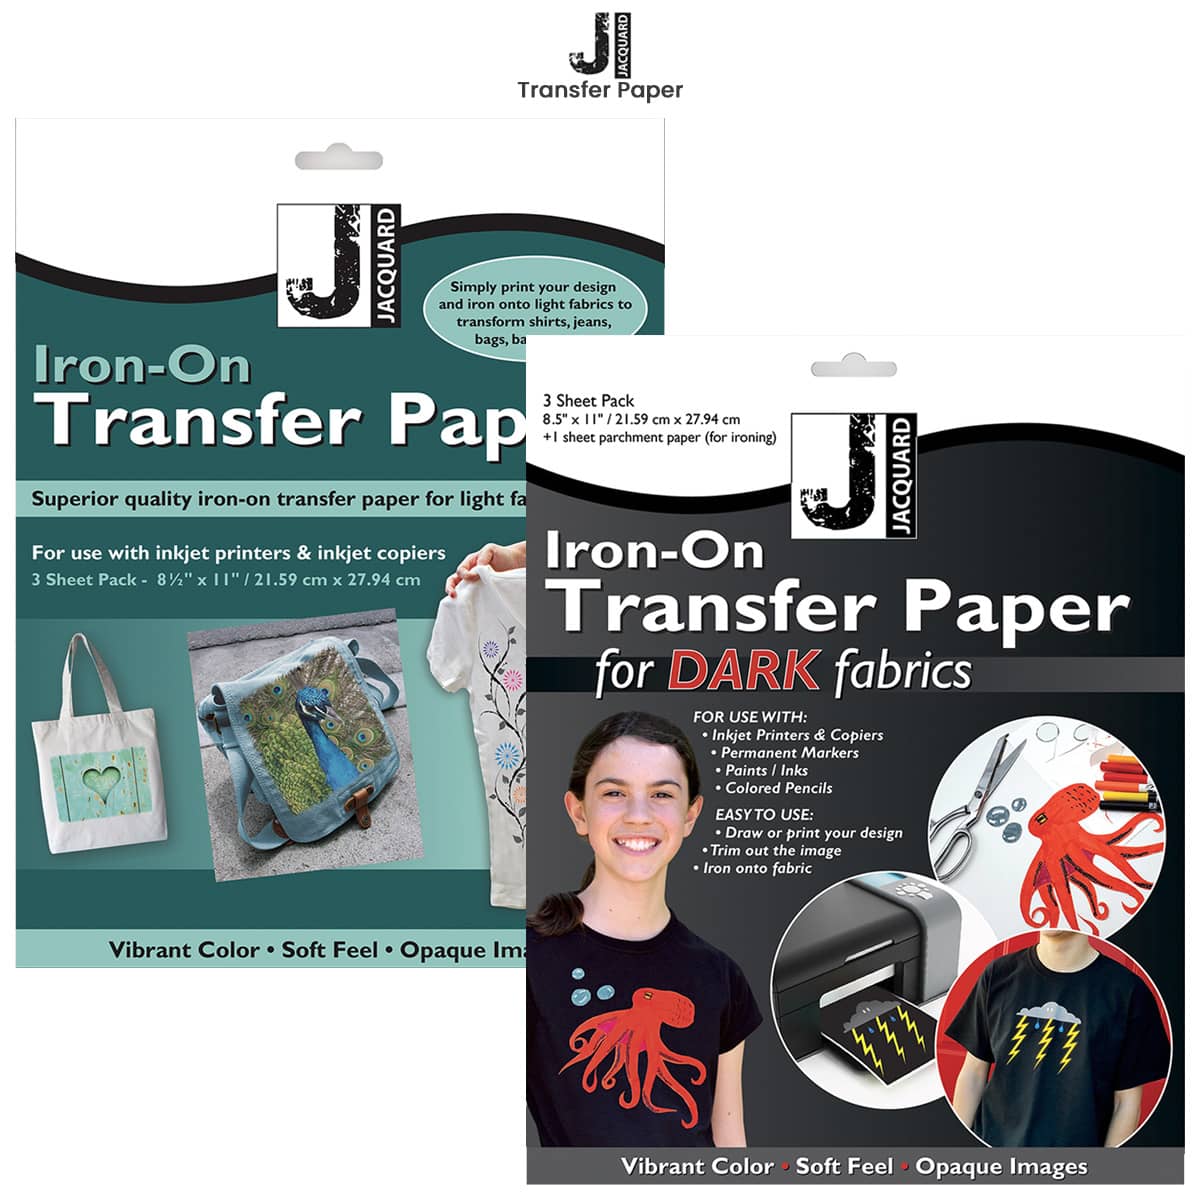 Saral Wax-Free Transfer Paper, 8.5 x 11 - 5 pack